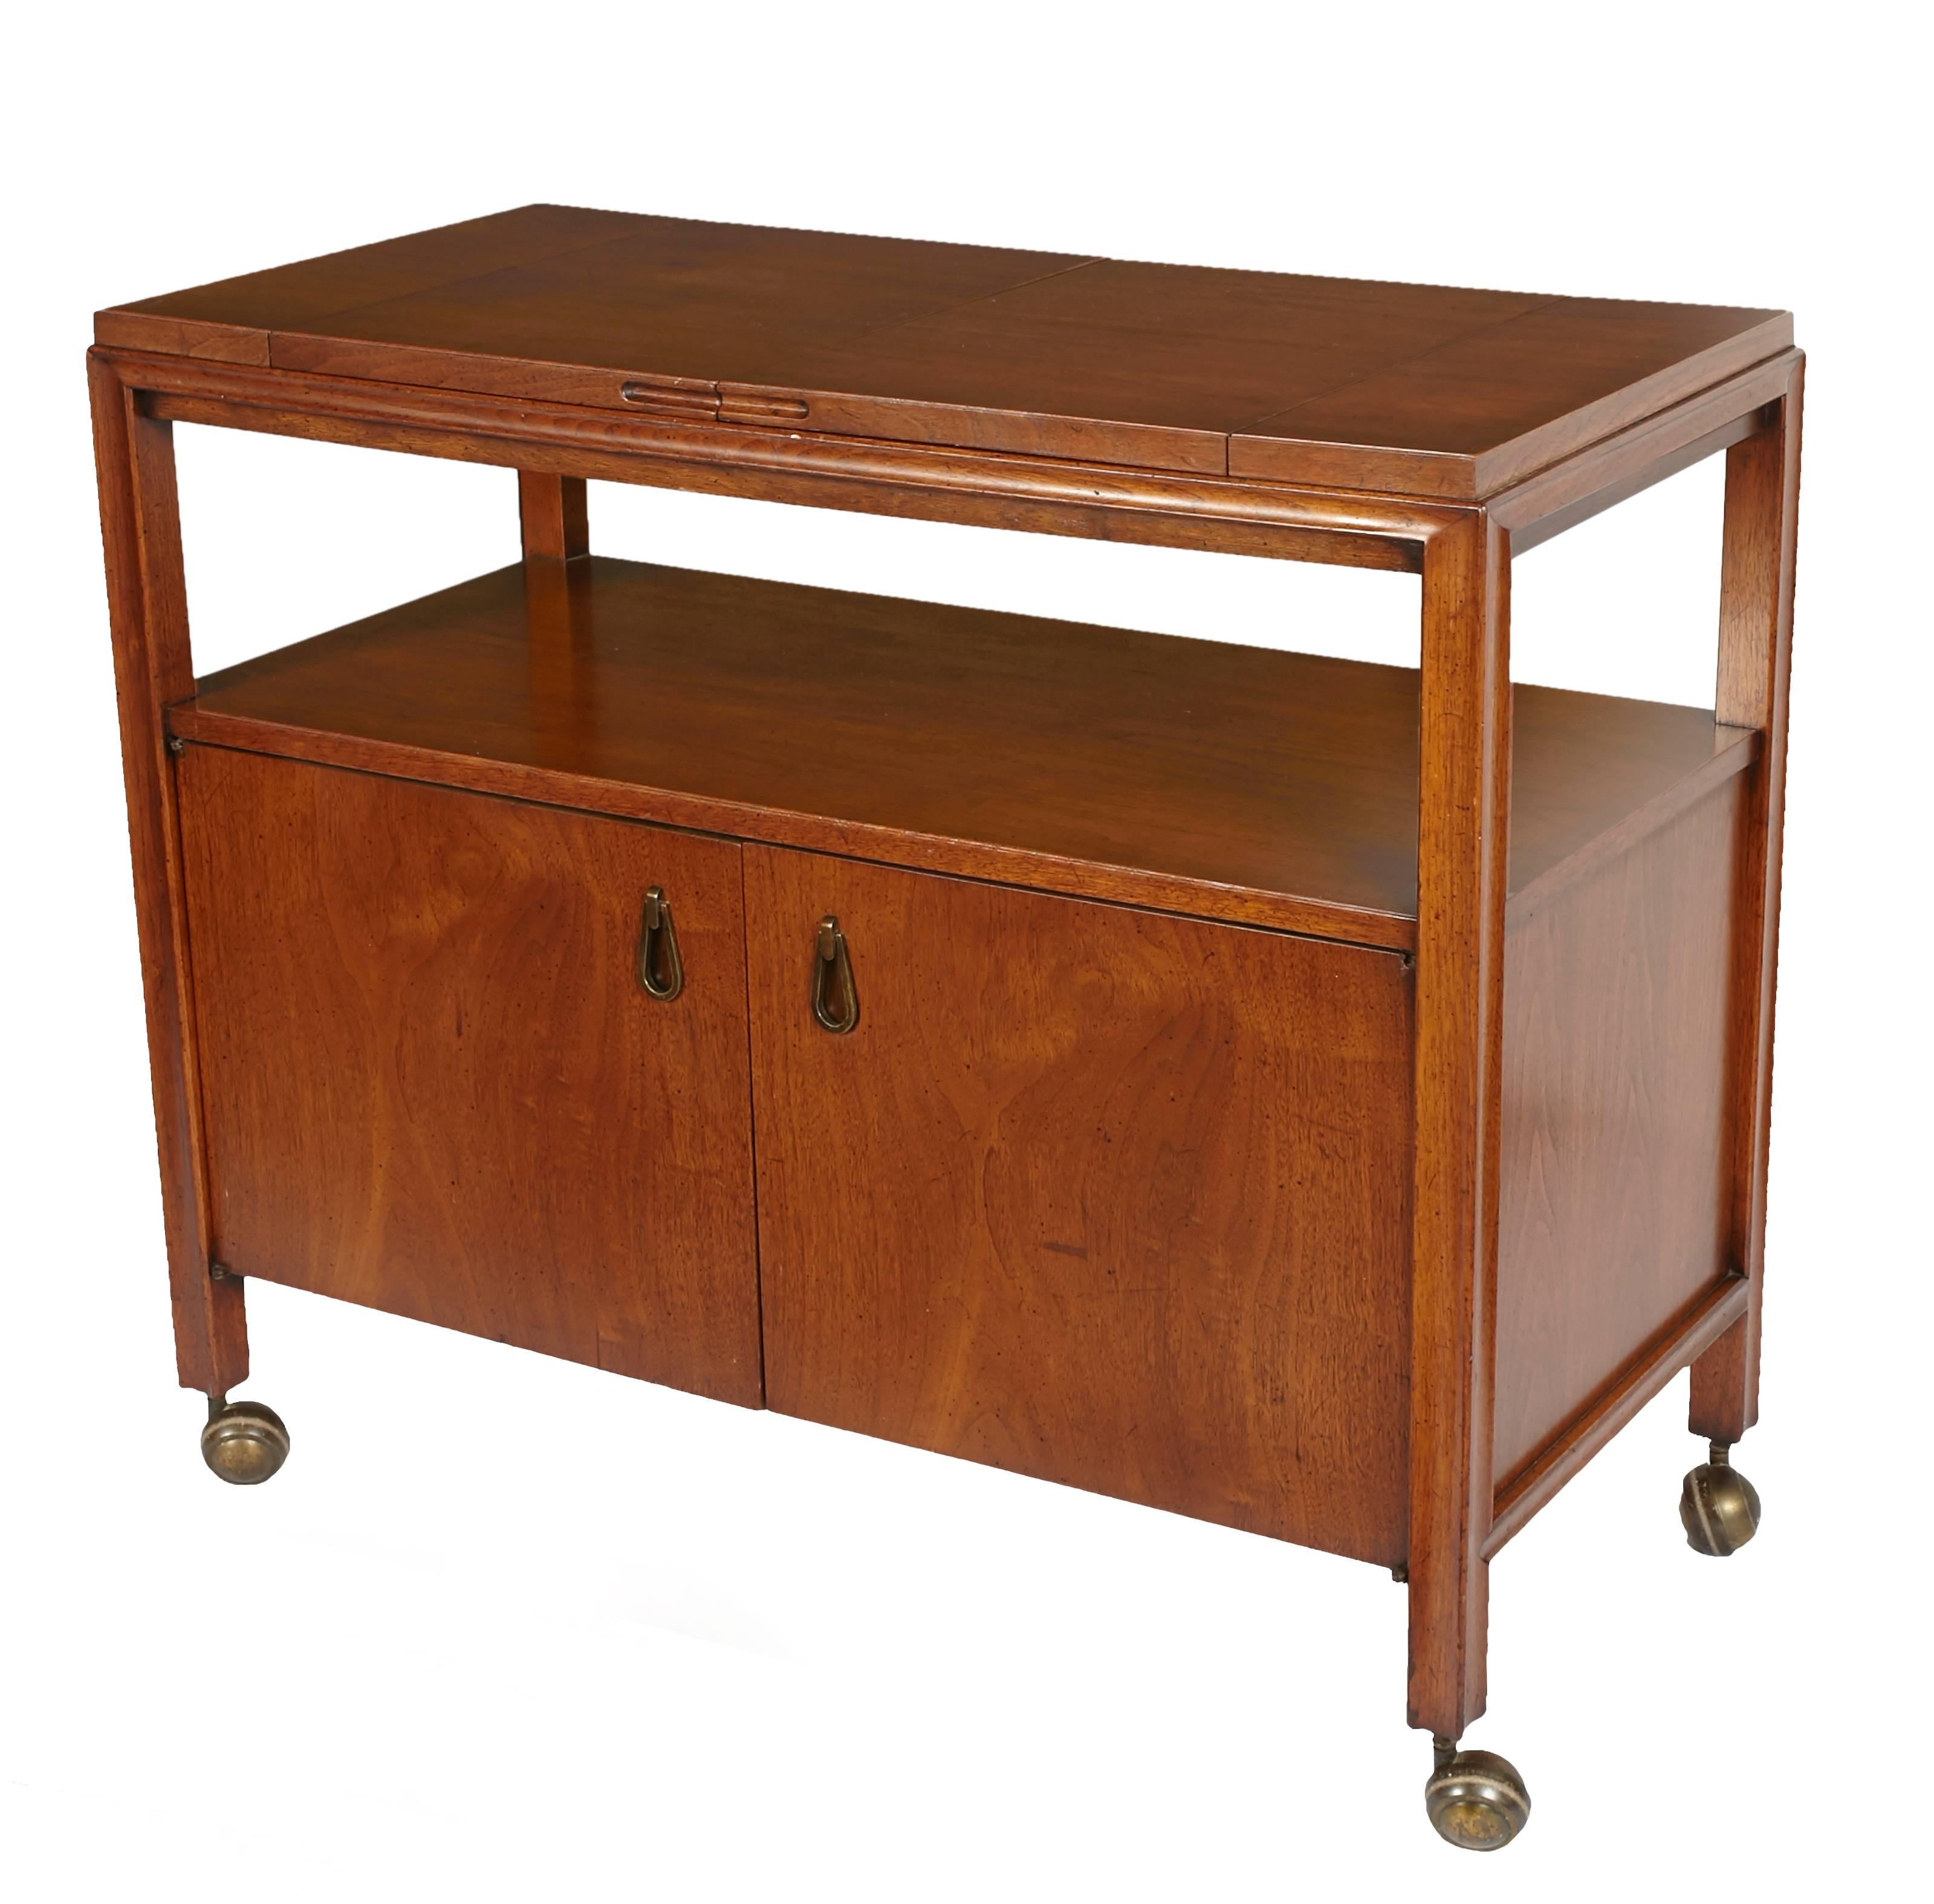 Beautiful Mid-Century Modern Walnut bar cart or server with brass handles and brass casters.
Top opens up with a black laminate top. Cabinet opens up with one shelf.
Has been lightly restored and is in beautiful condition.